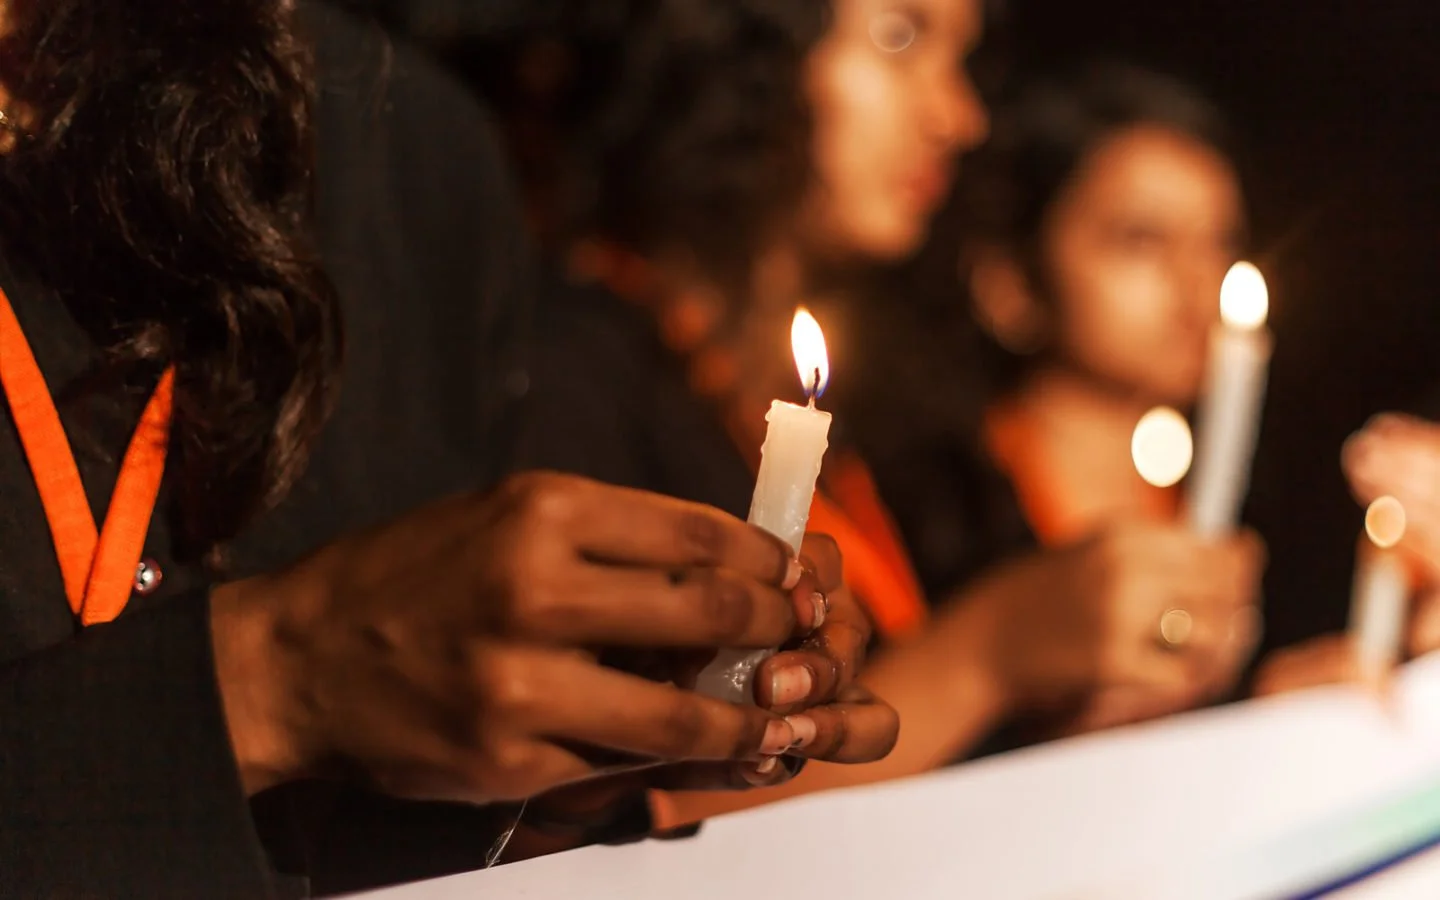 people marching behind a banner, holding candles. Shot is a close up of a hand holding candle.